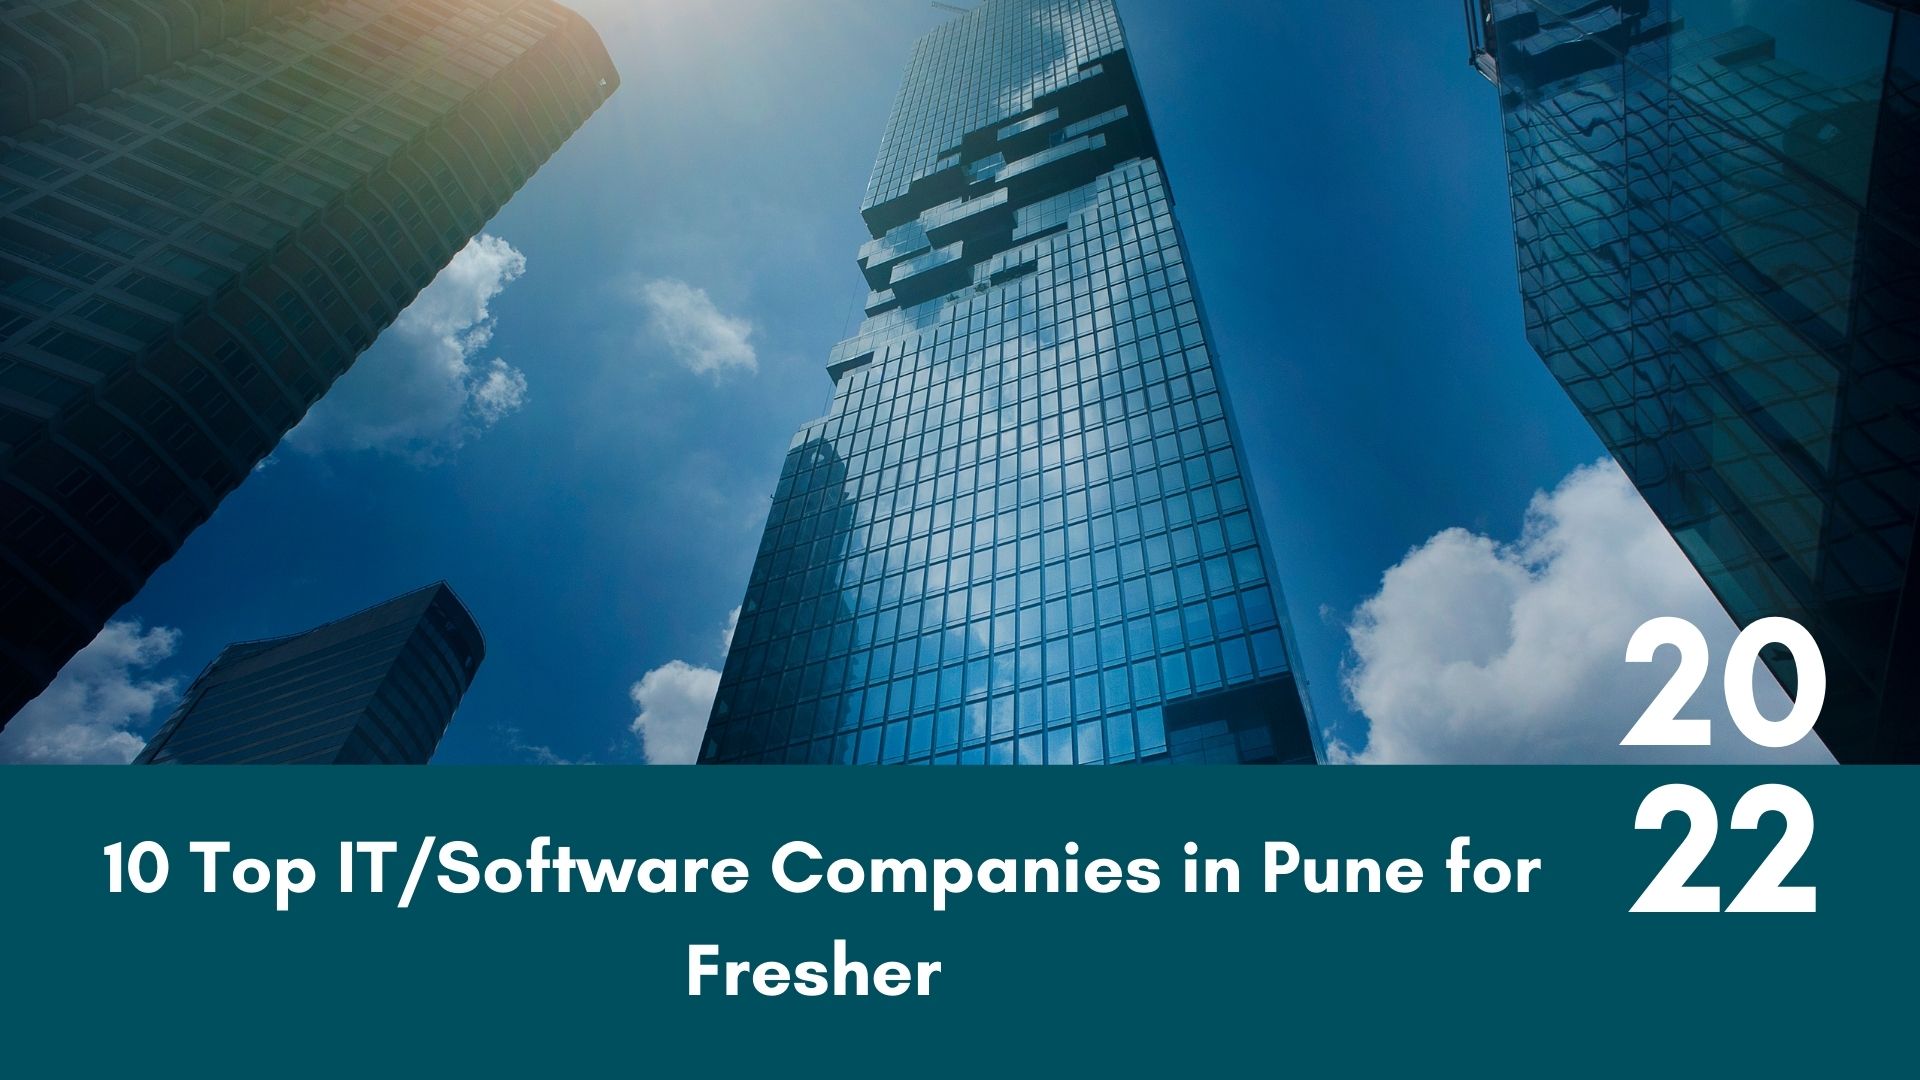 10 Top IT/Software Companies in Pune for Fresher 2022